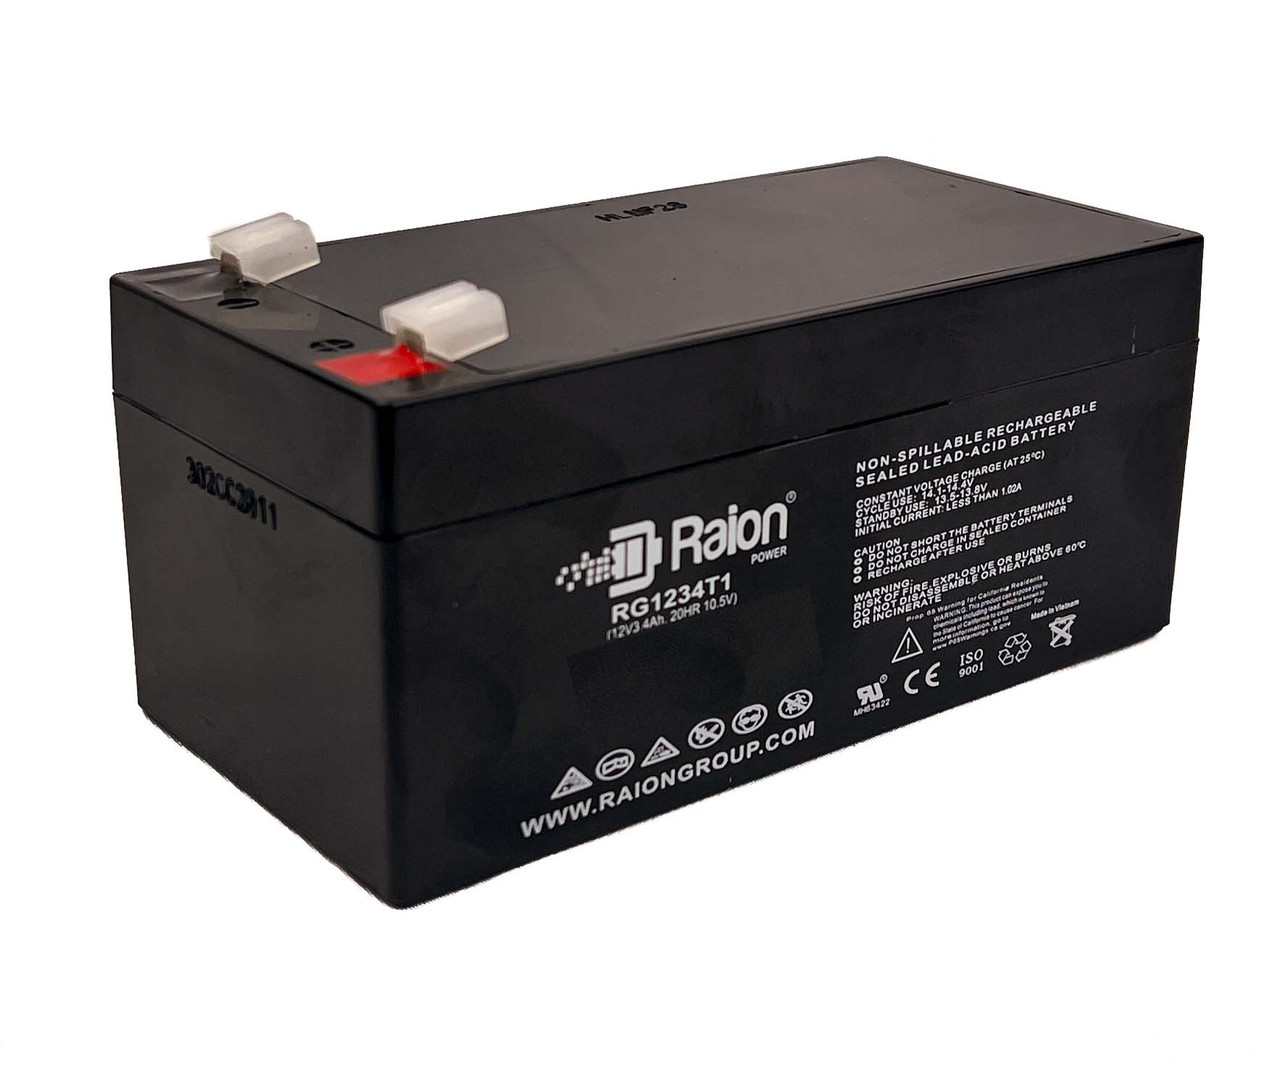 Raion Power 12V 3.4Ah Non-Spillable Replacement Battery for Abbott Laboratories Life Care 900 Pump